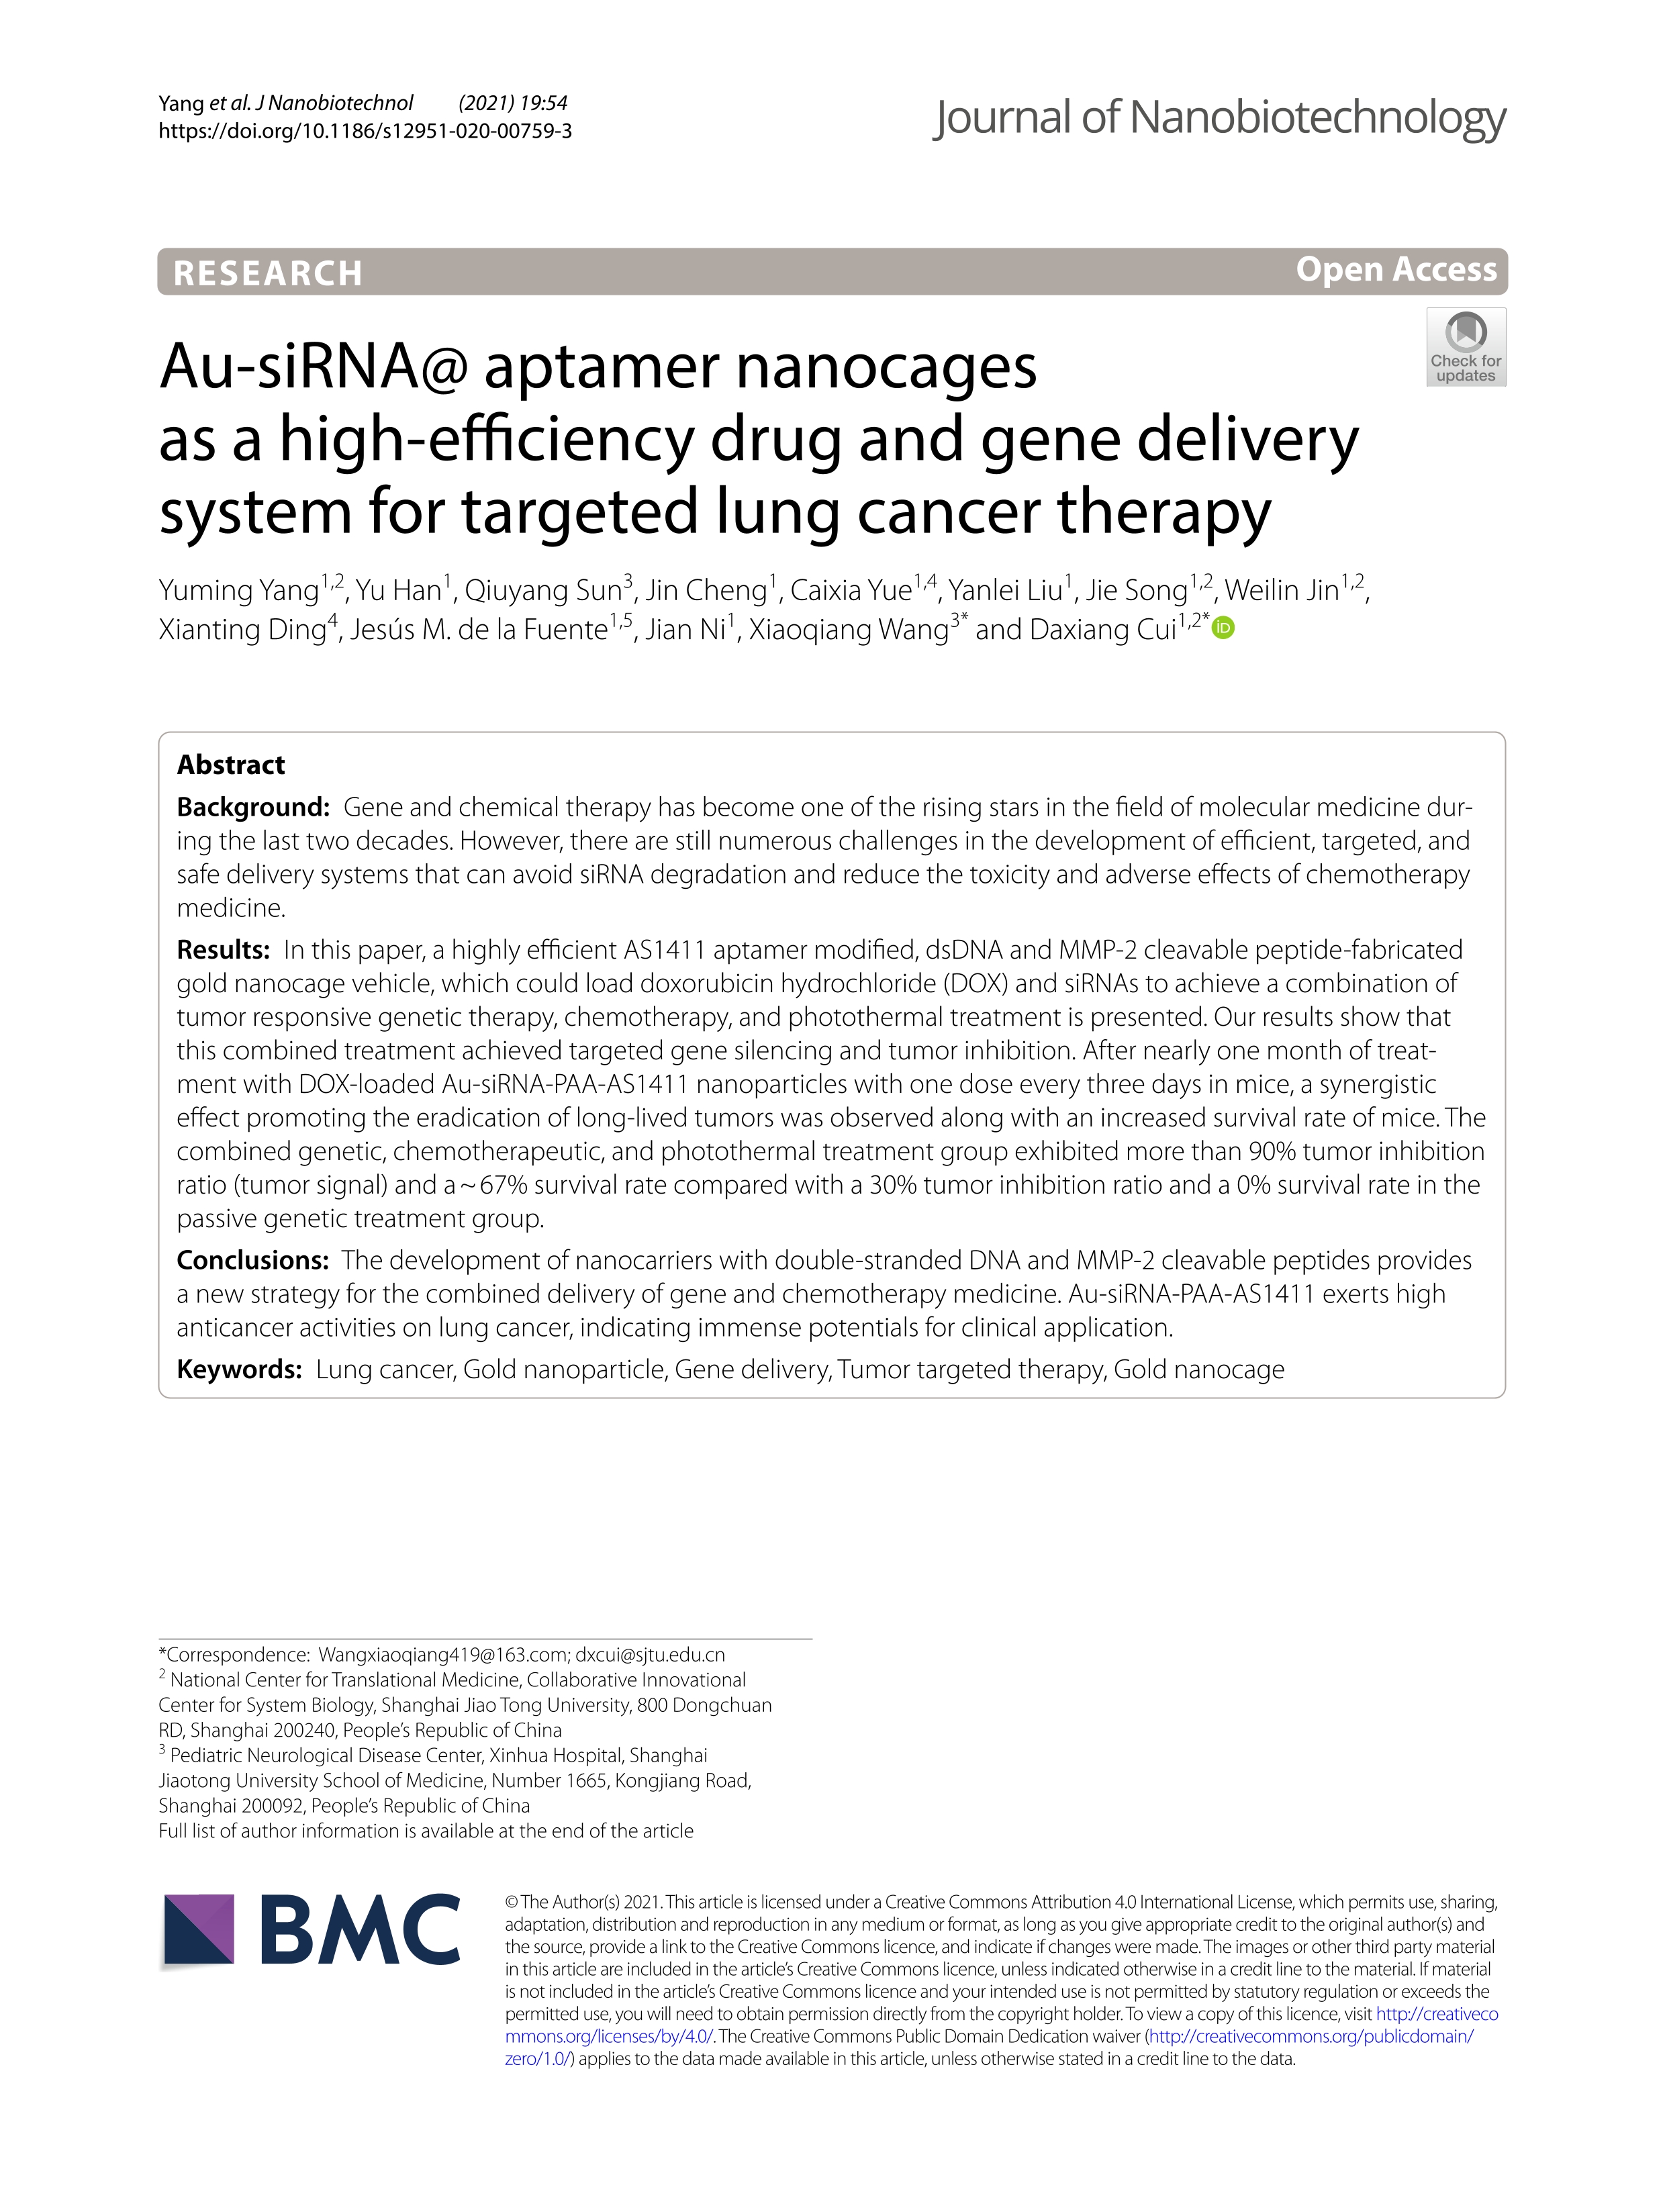 Au-siRNA@ aptamer nanocages as a high-efficiency drug and gene delivery system for targeted lung cancer therapy